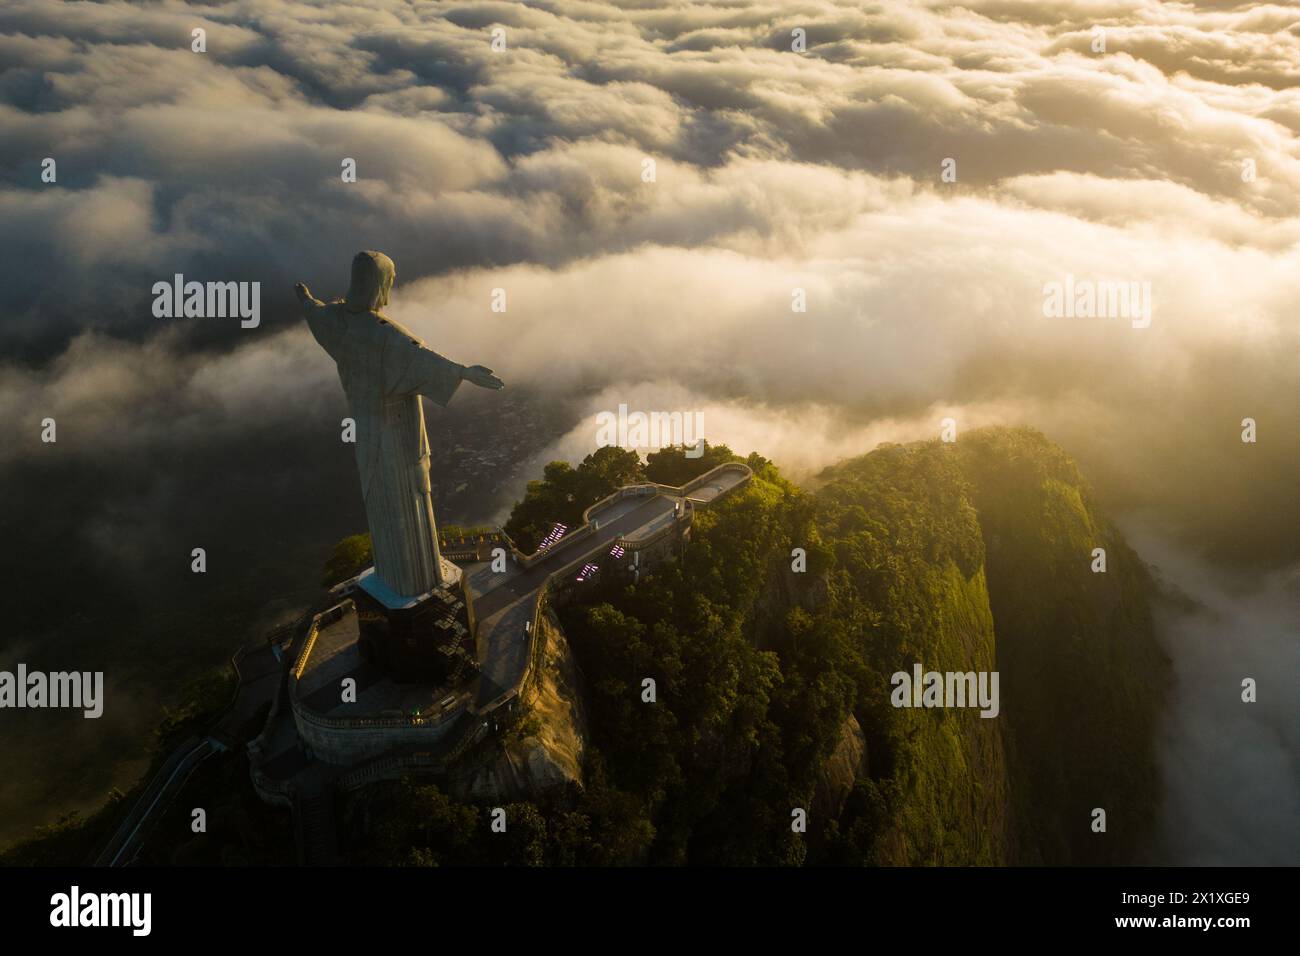 Rio de Janeiro, Brazil - April 11, 2024: Dramatic view of Christ the Redeemer statue on top of the Corcovado mountain above clouds during sunrise. Stock Photo